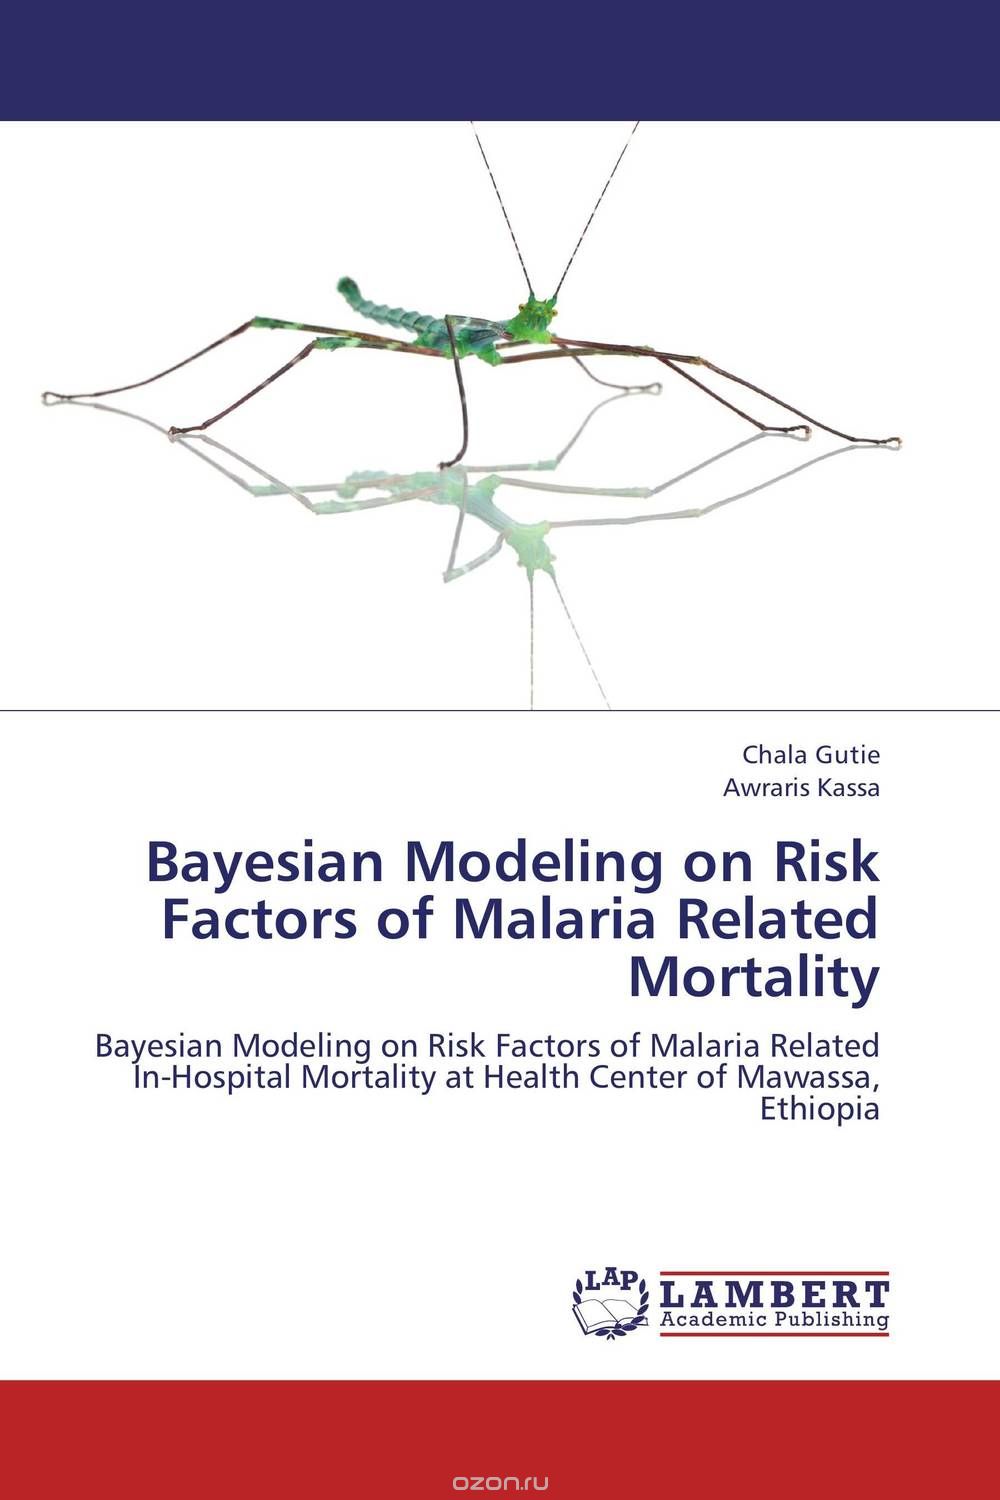 Bayesian Modeling on Risk Factors of Malaria Related Mortality